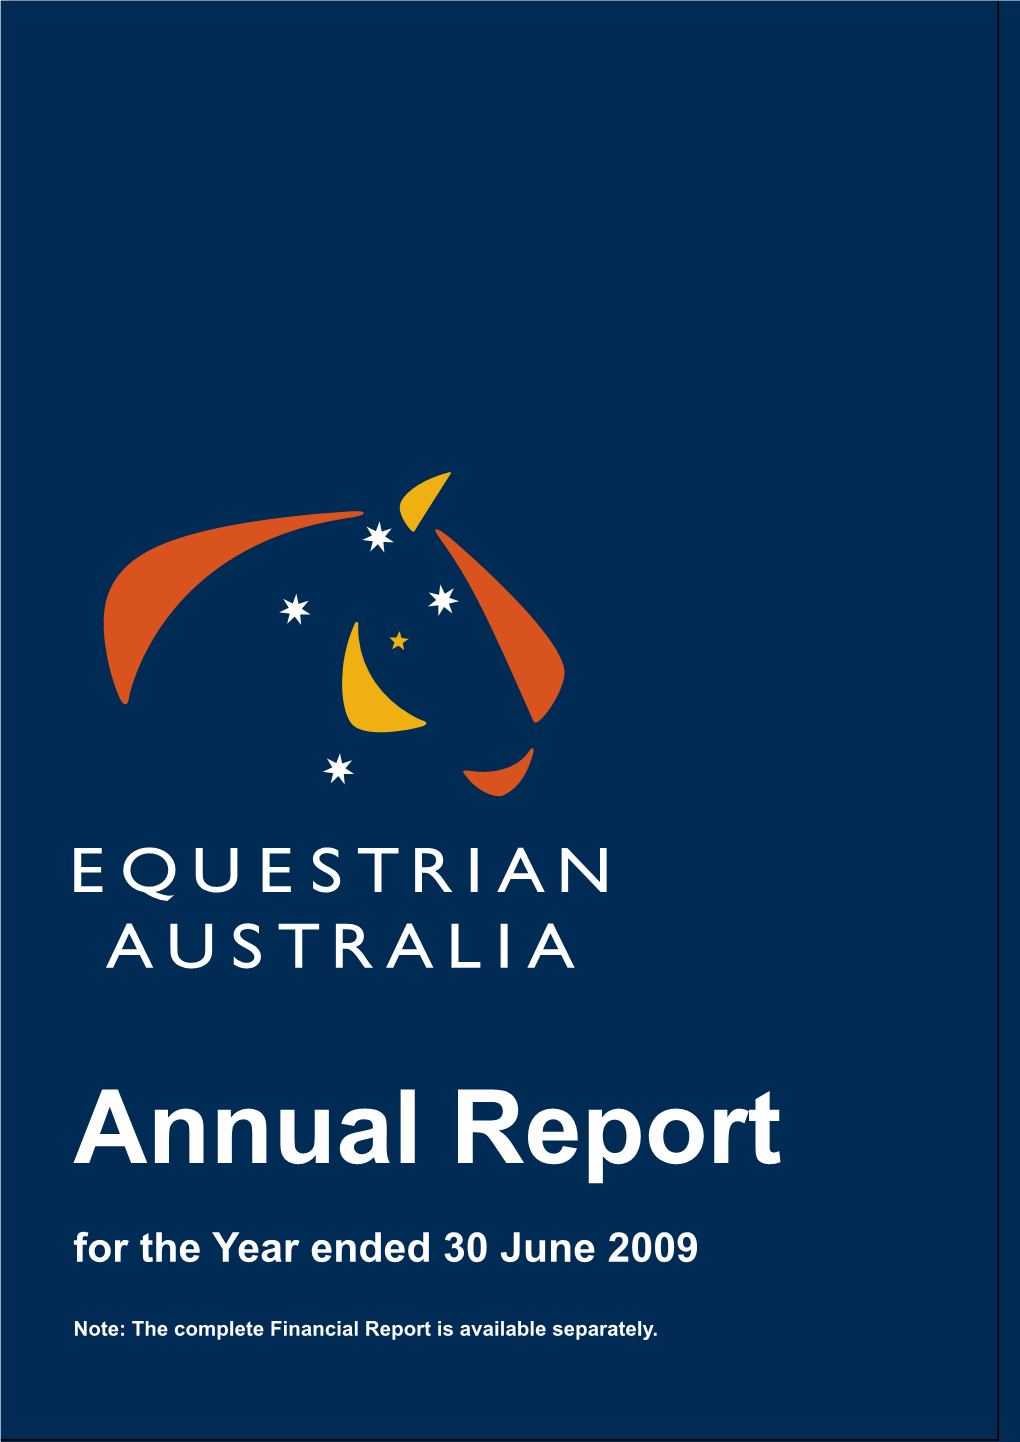 Annual Report for the Year Ended 30 June 2009